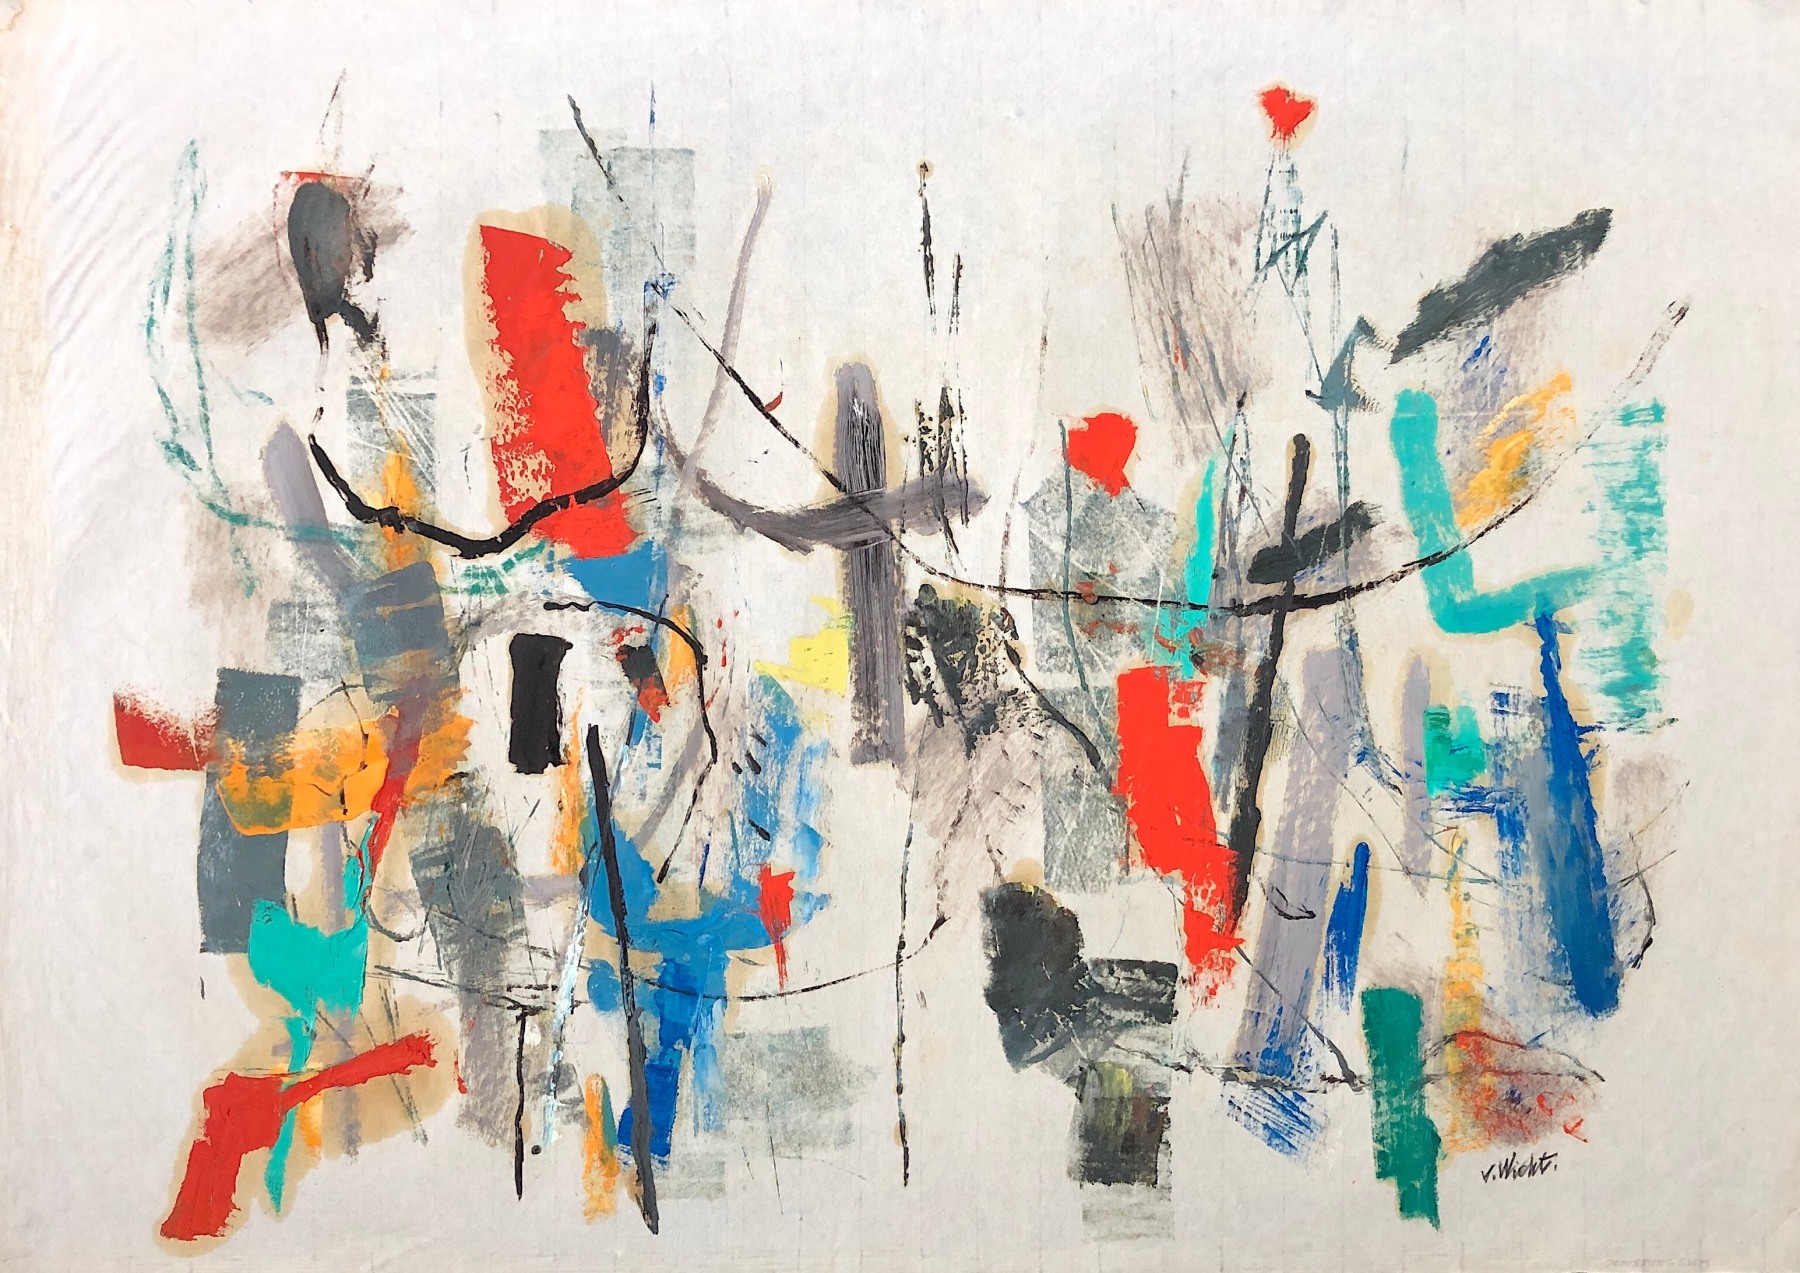 Sold untitled mixed media painting by John Von Wicht